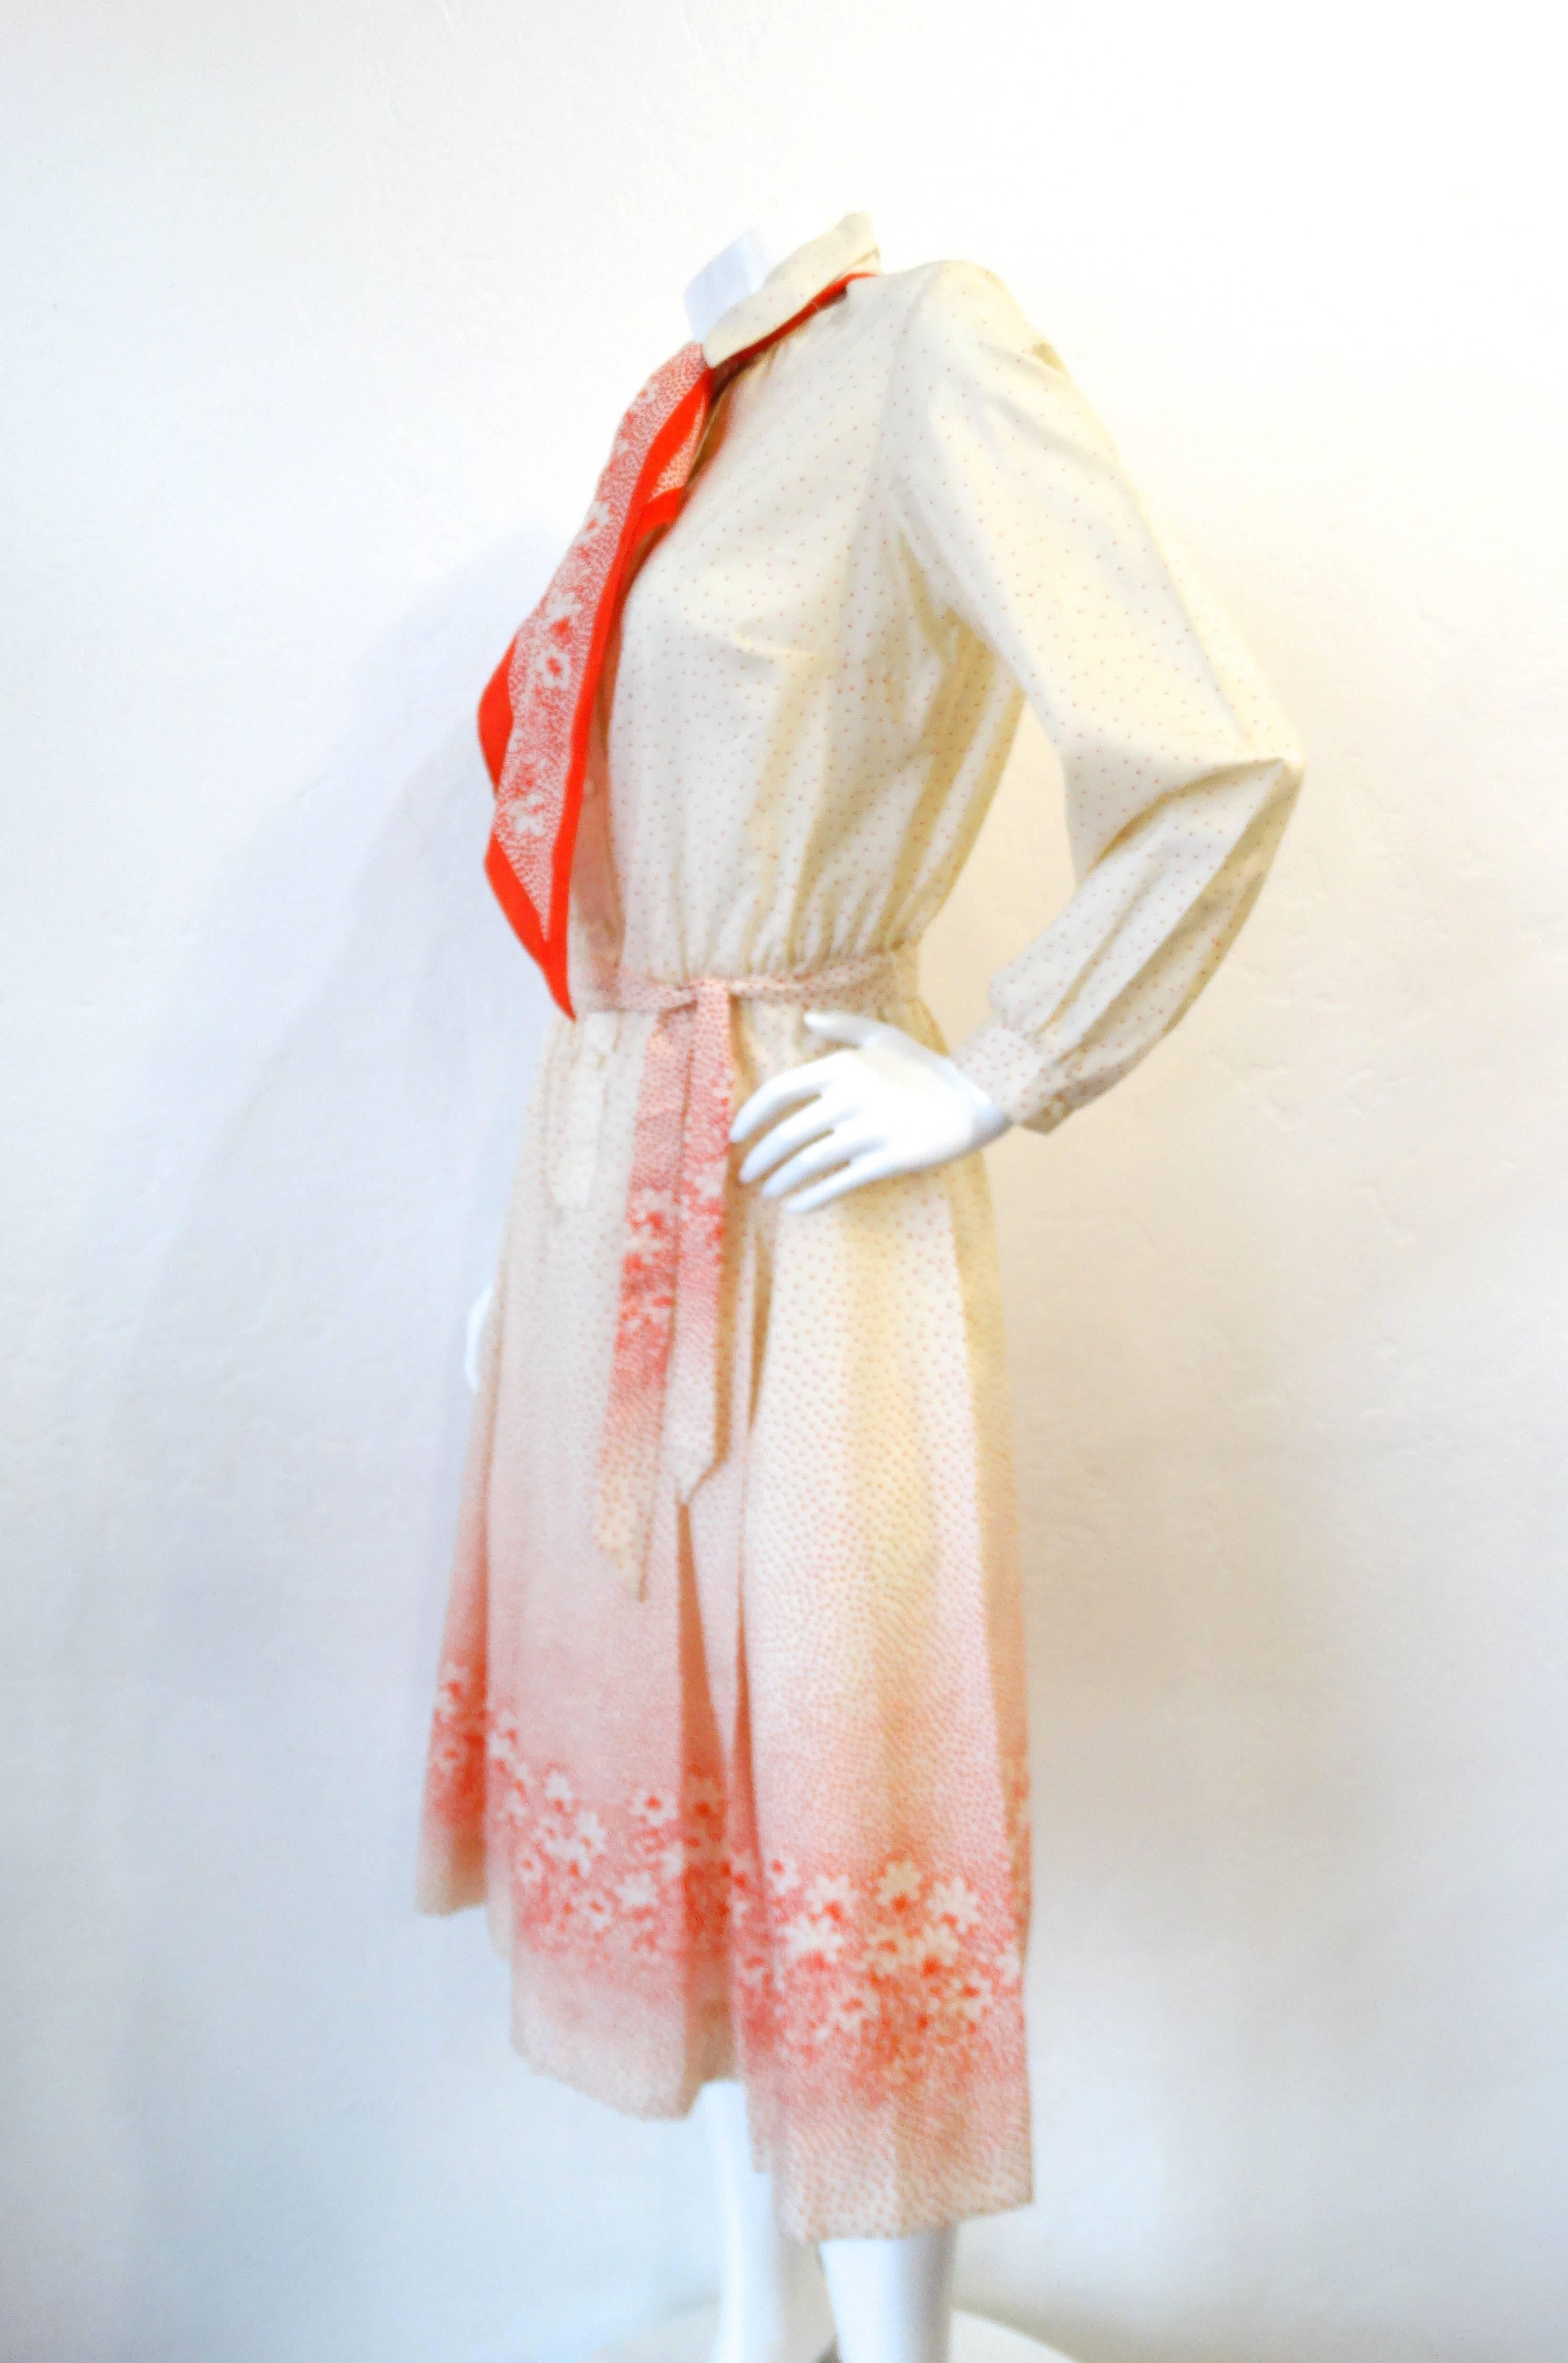 1960s Lanvin Cream & Red Polkadot Floral Dress For Sale 1